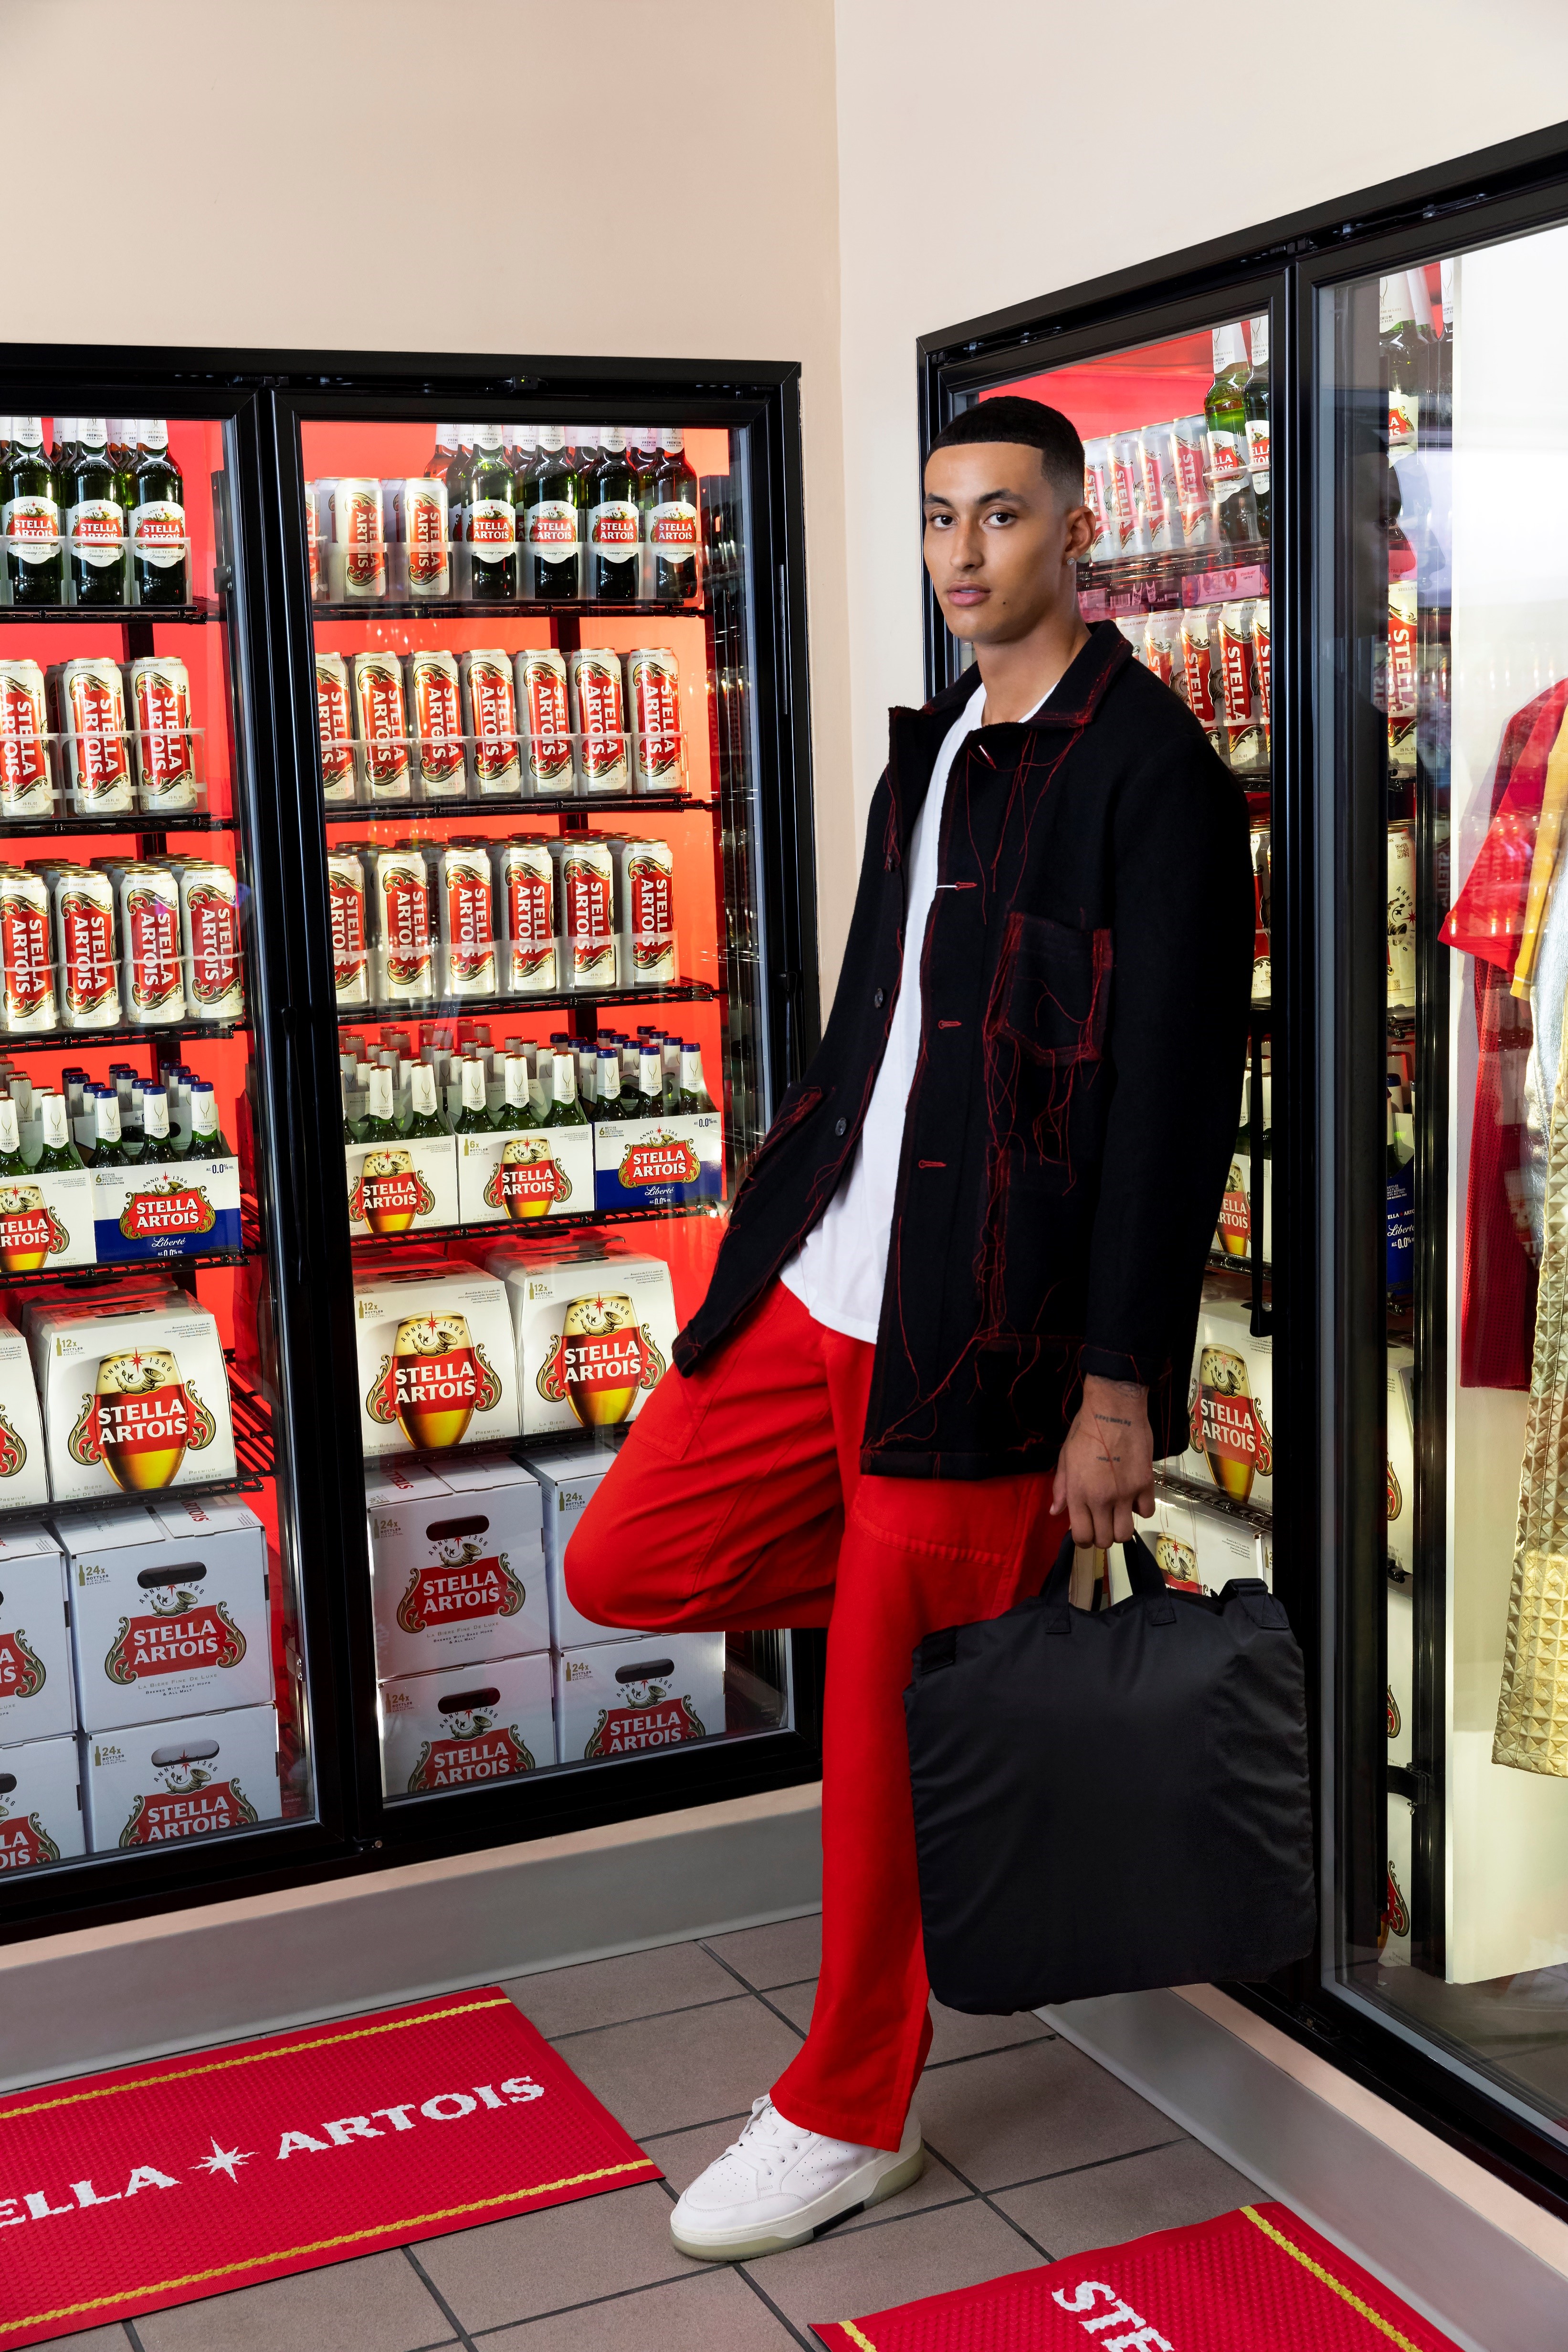 Basketball star Kyle Kuzma partners with Stella Artois to offer the exclusive opportunity to win a $10,000 fashion shopping spree inspiring fans elevate everyday experiences while savoring a unique experience in The Life Artois.